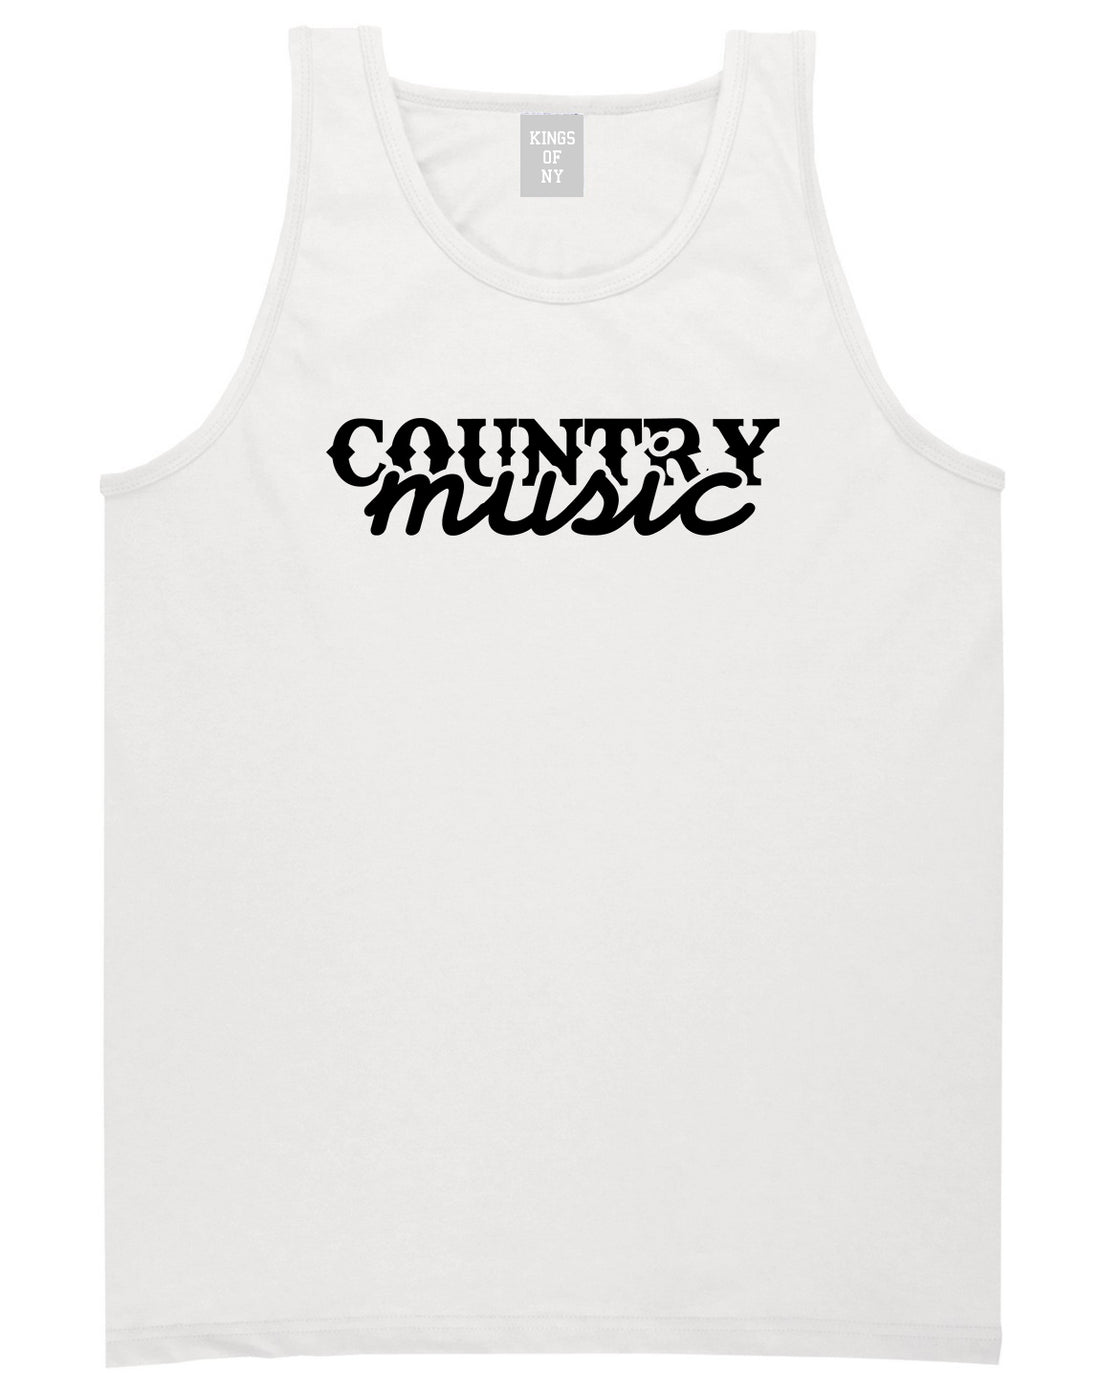 Country Music White Tank Top Shirt by Kings Of NY